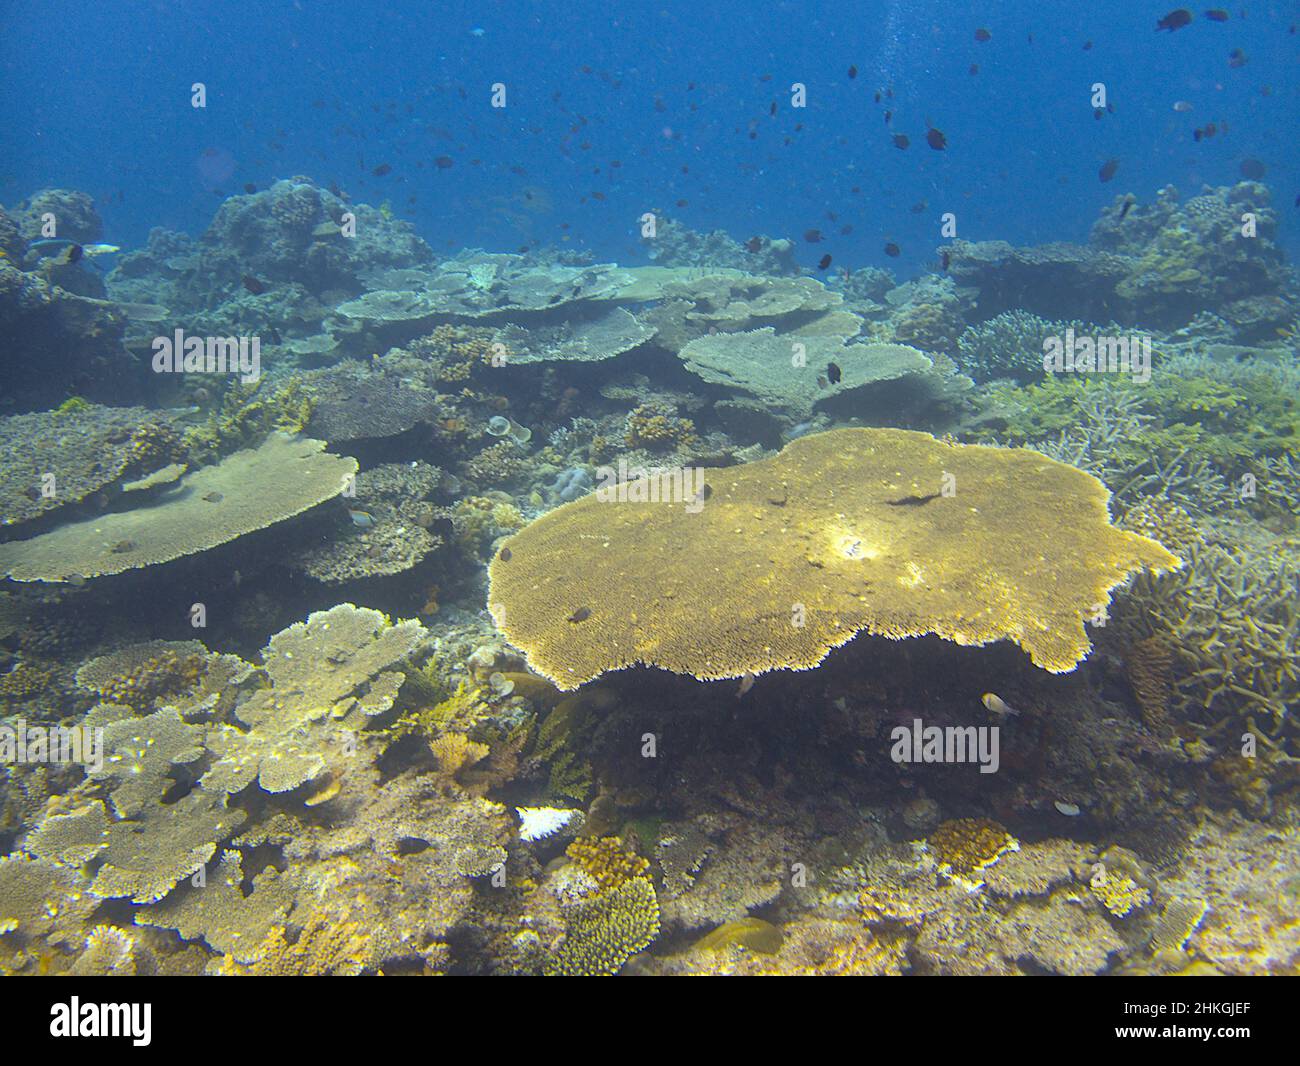 Table corals in the sea Stock Photo